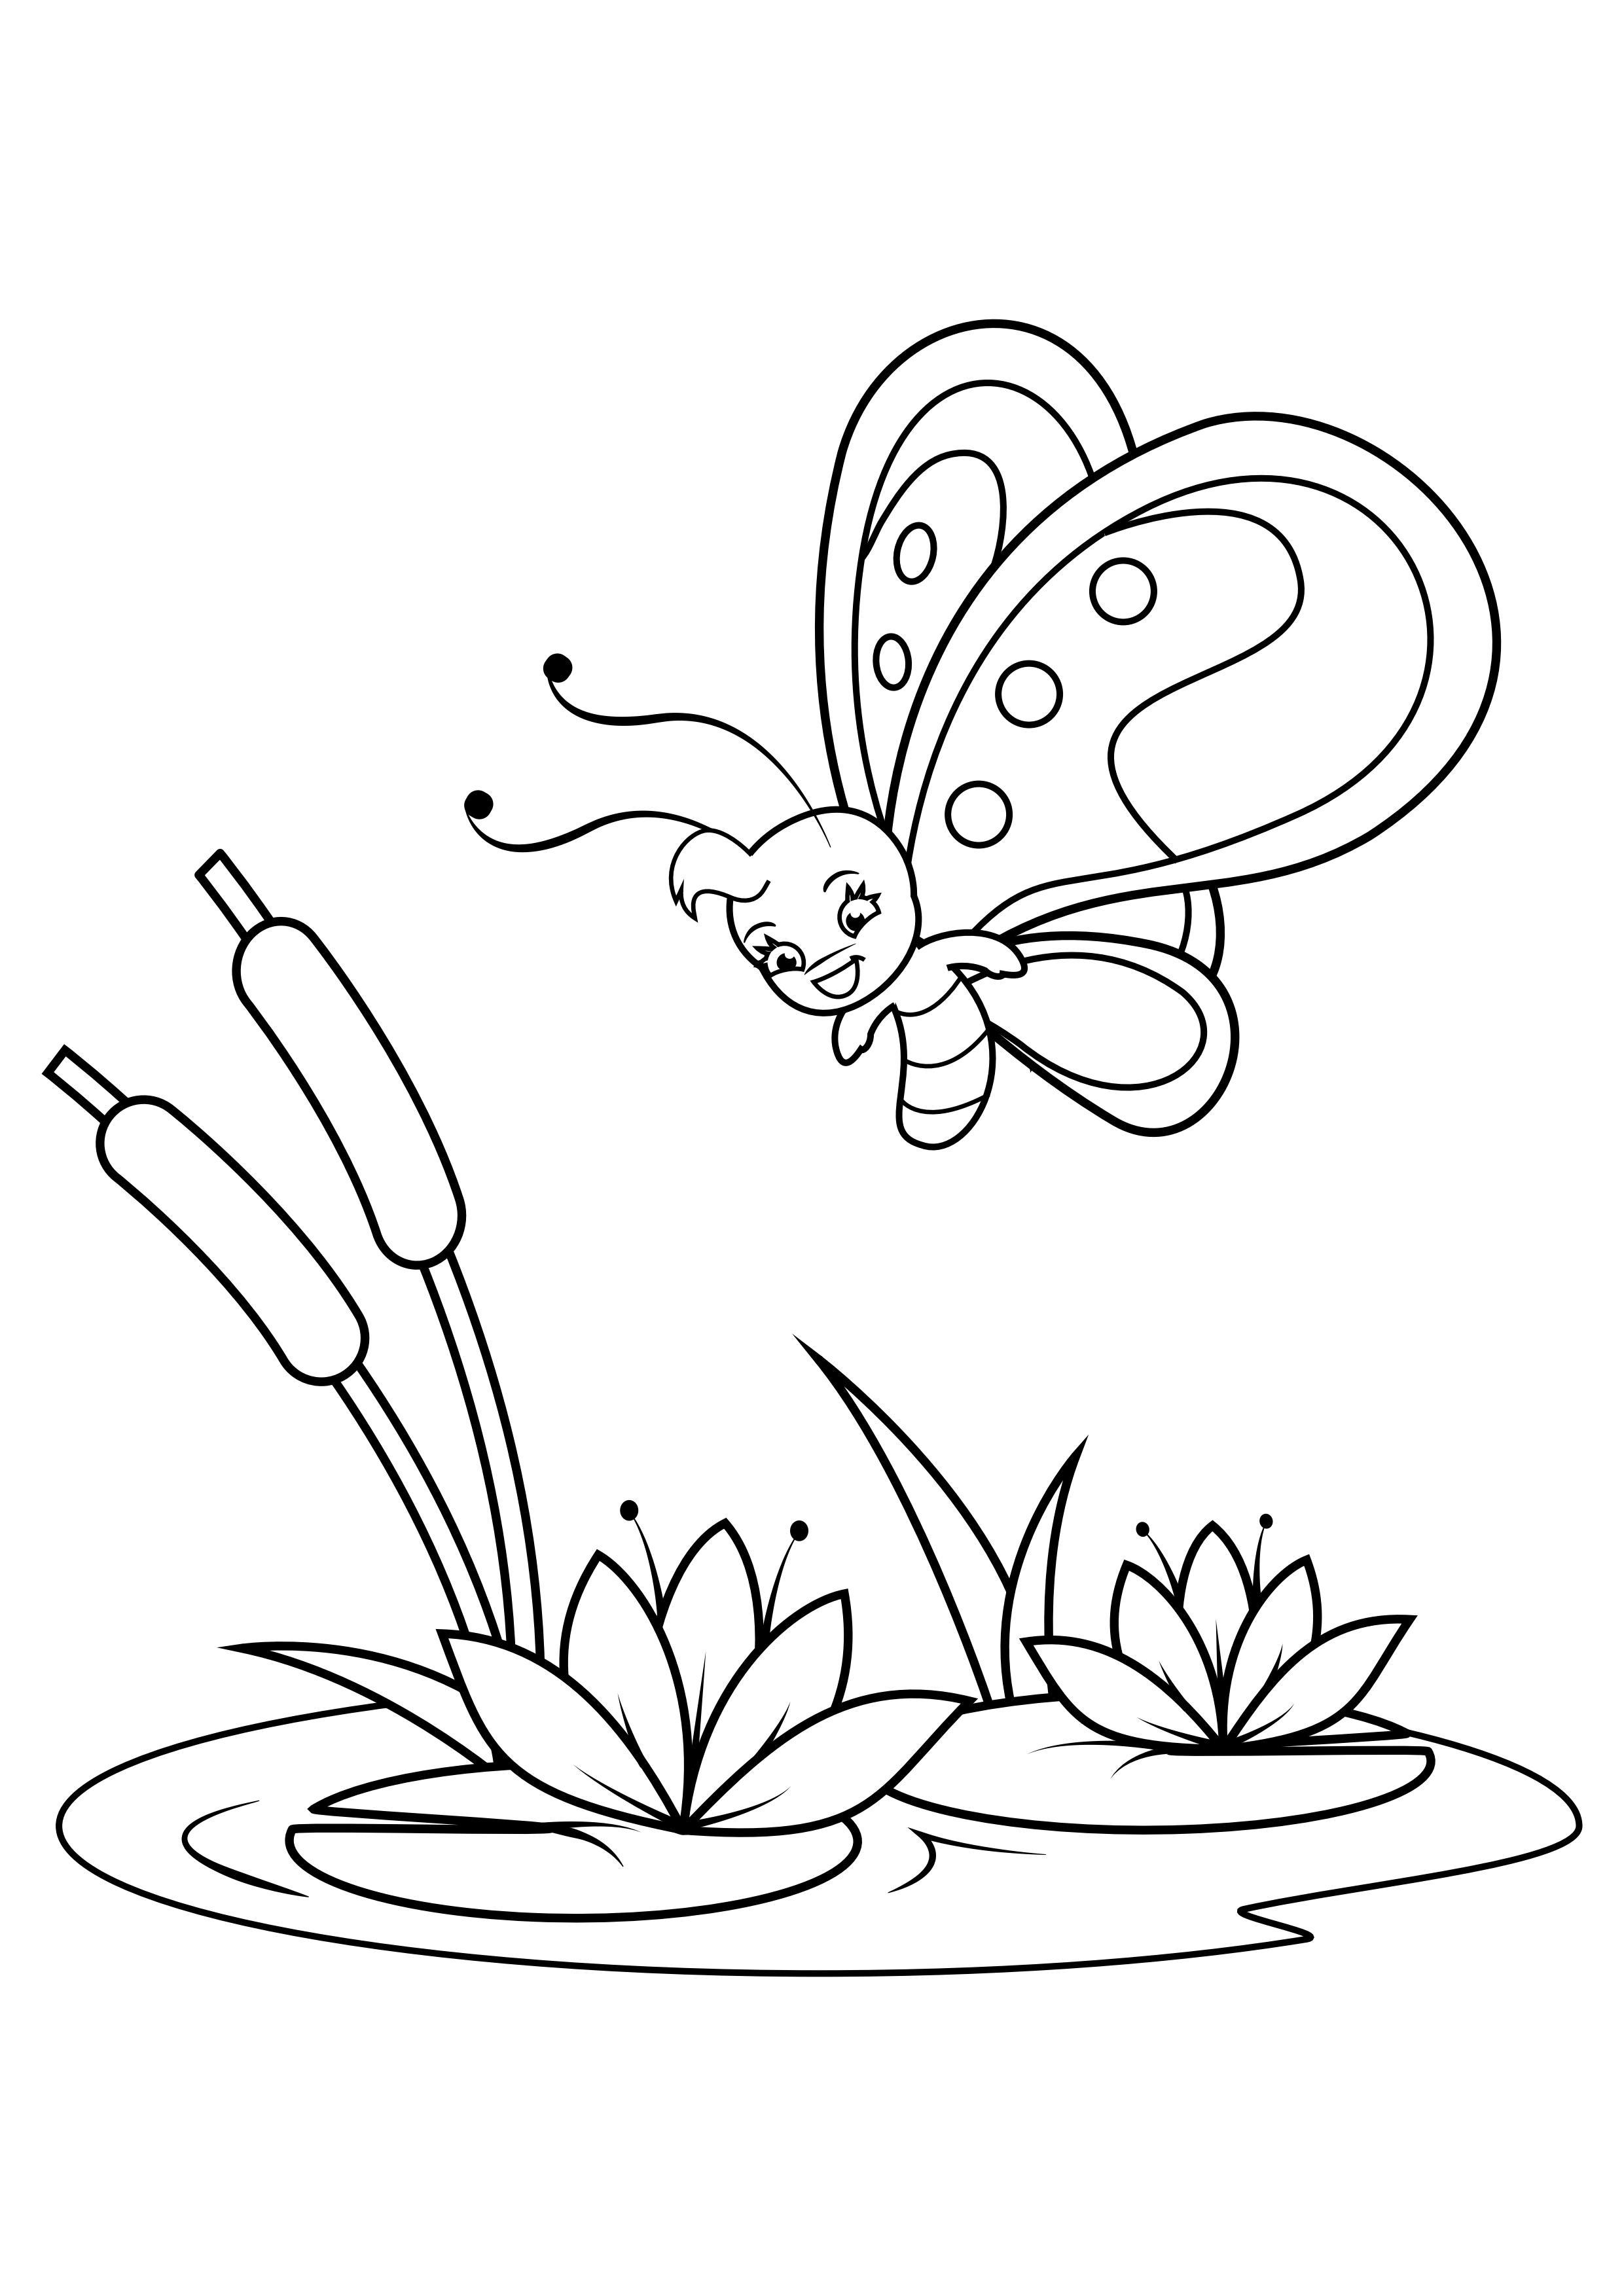 Coloring page butterfly above water lilies